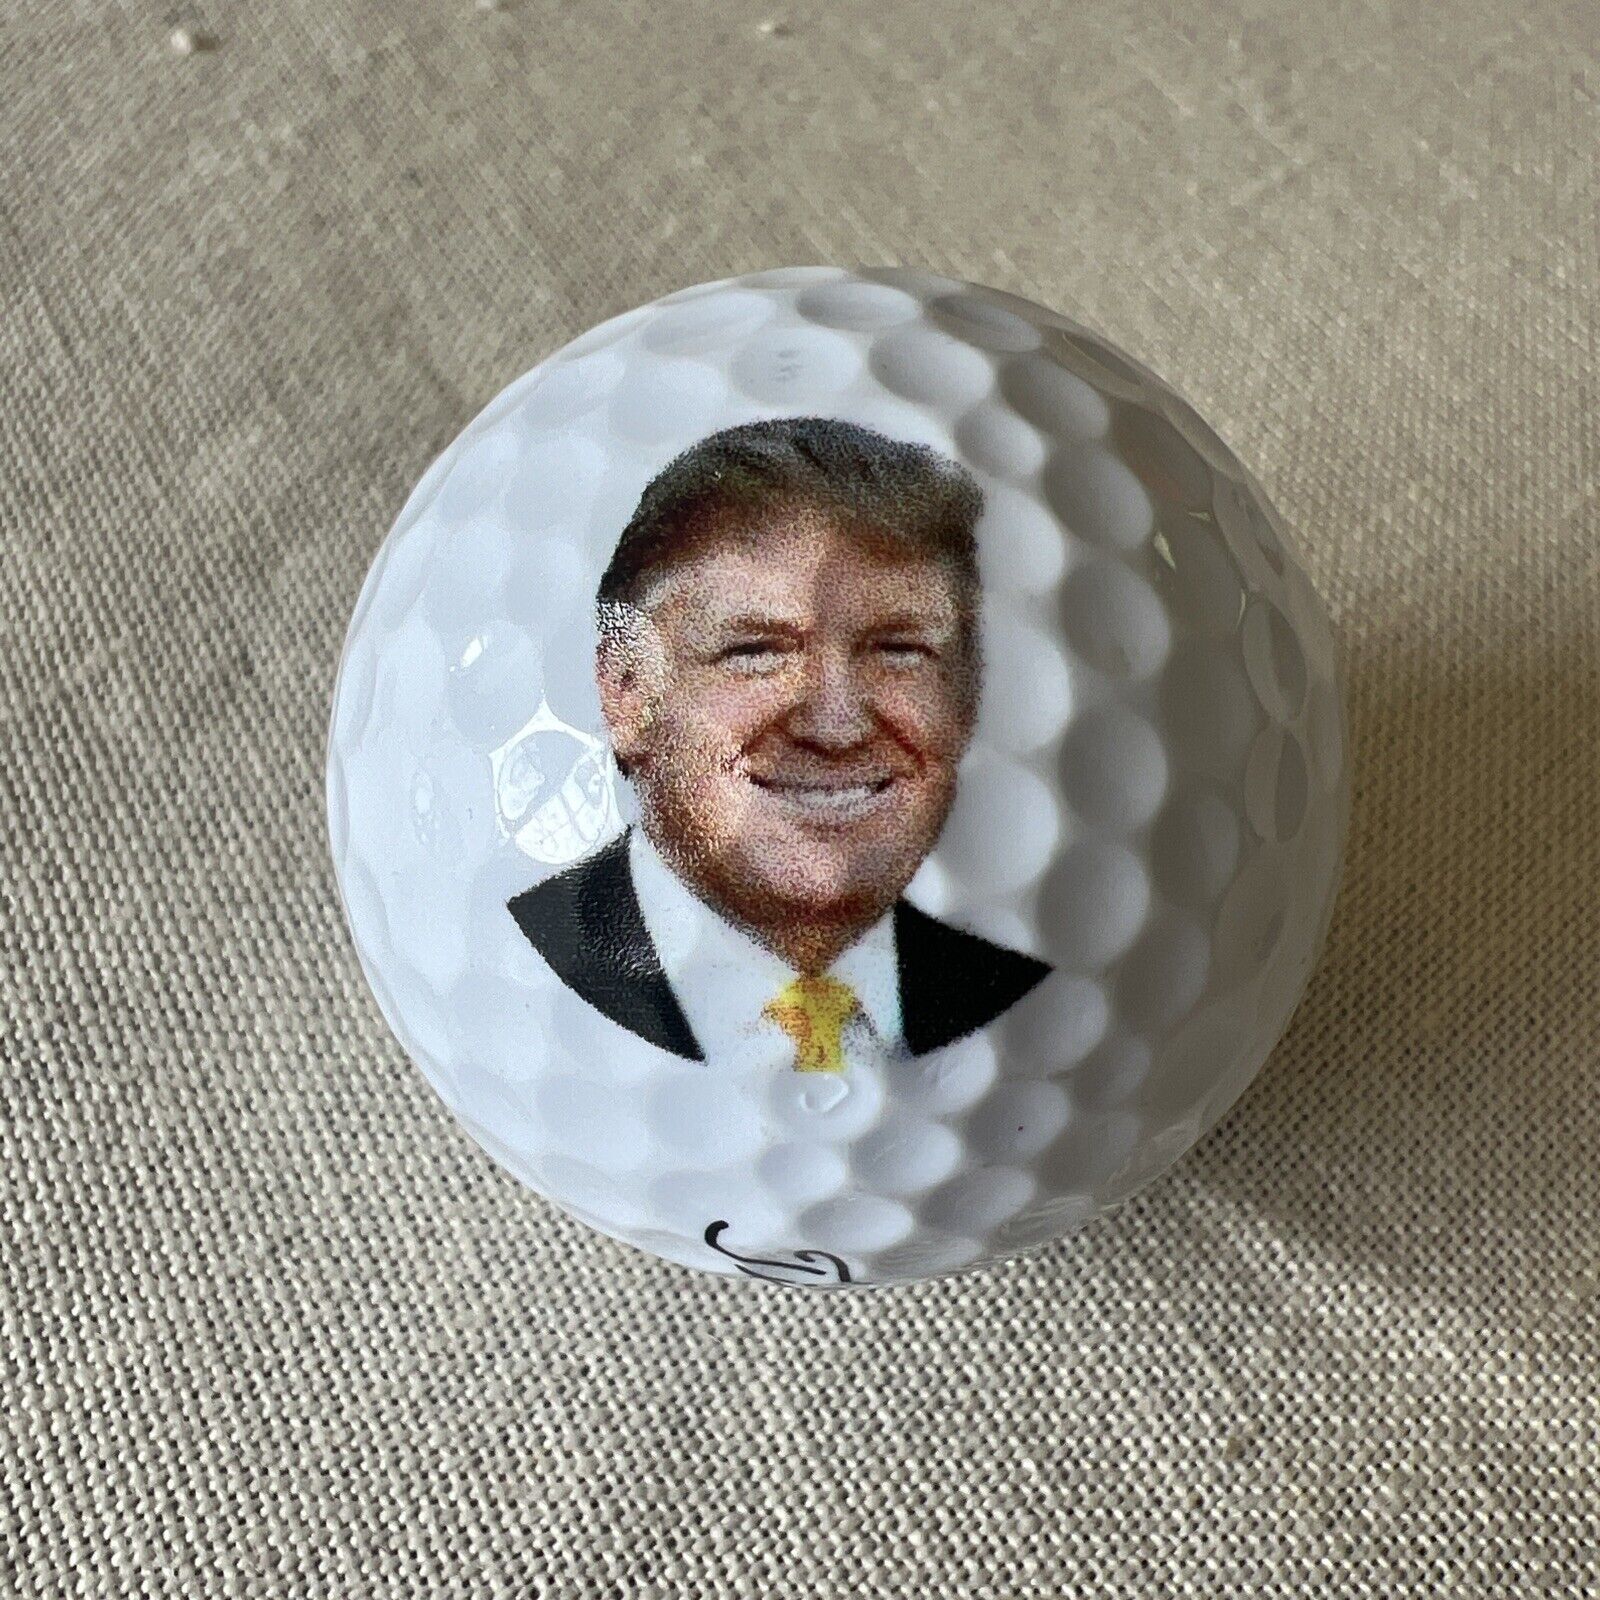 Trump Golf Ball With Picture. Rare. Titleist 4. New